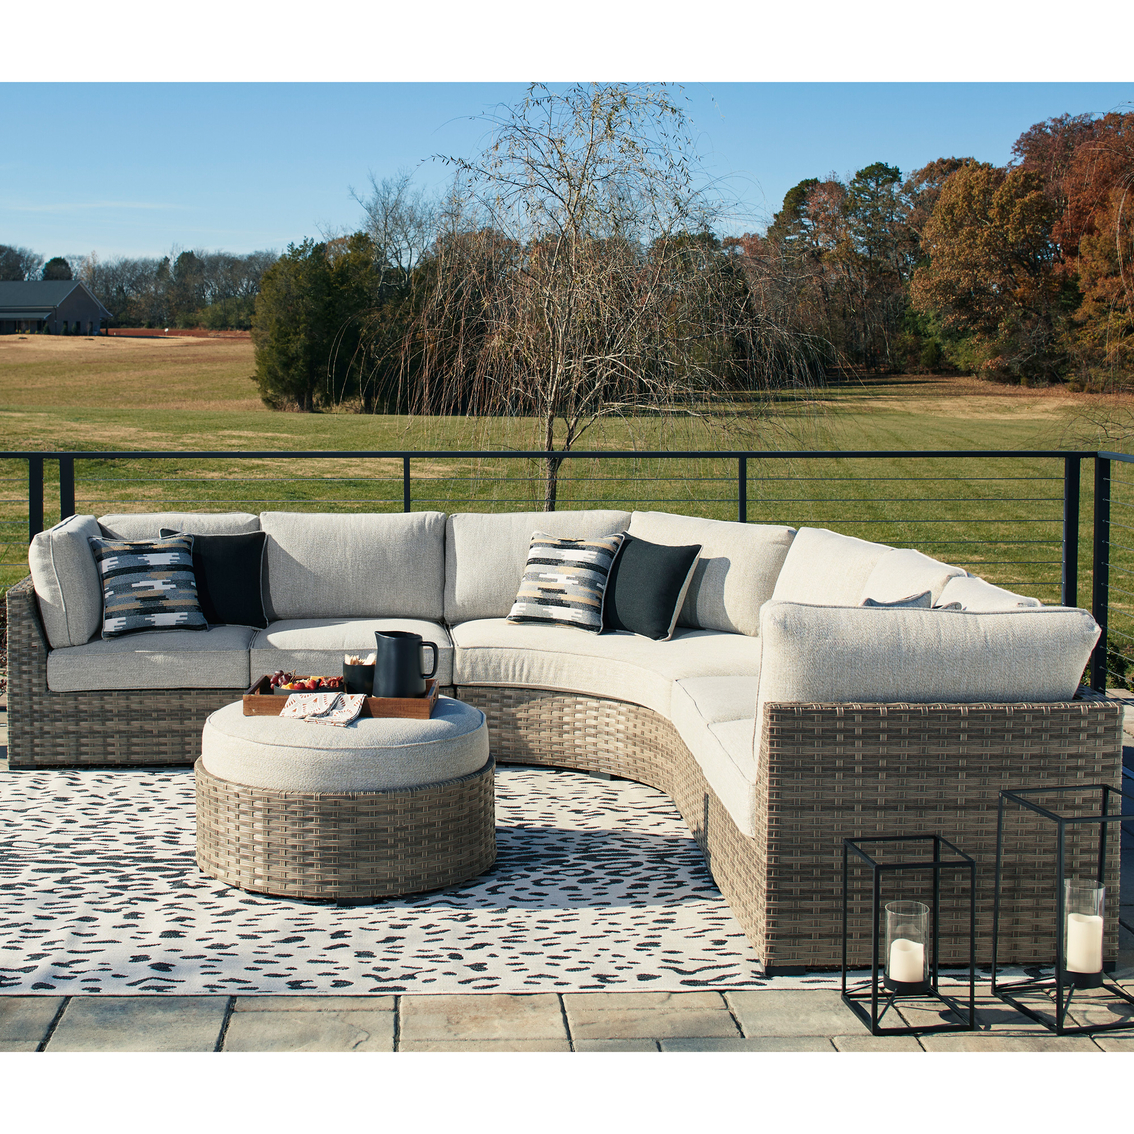 Signature Design by Ashley Calworth Outdoor 6 pc. Set - Image 2 of 6